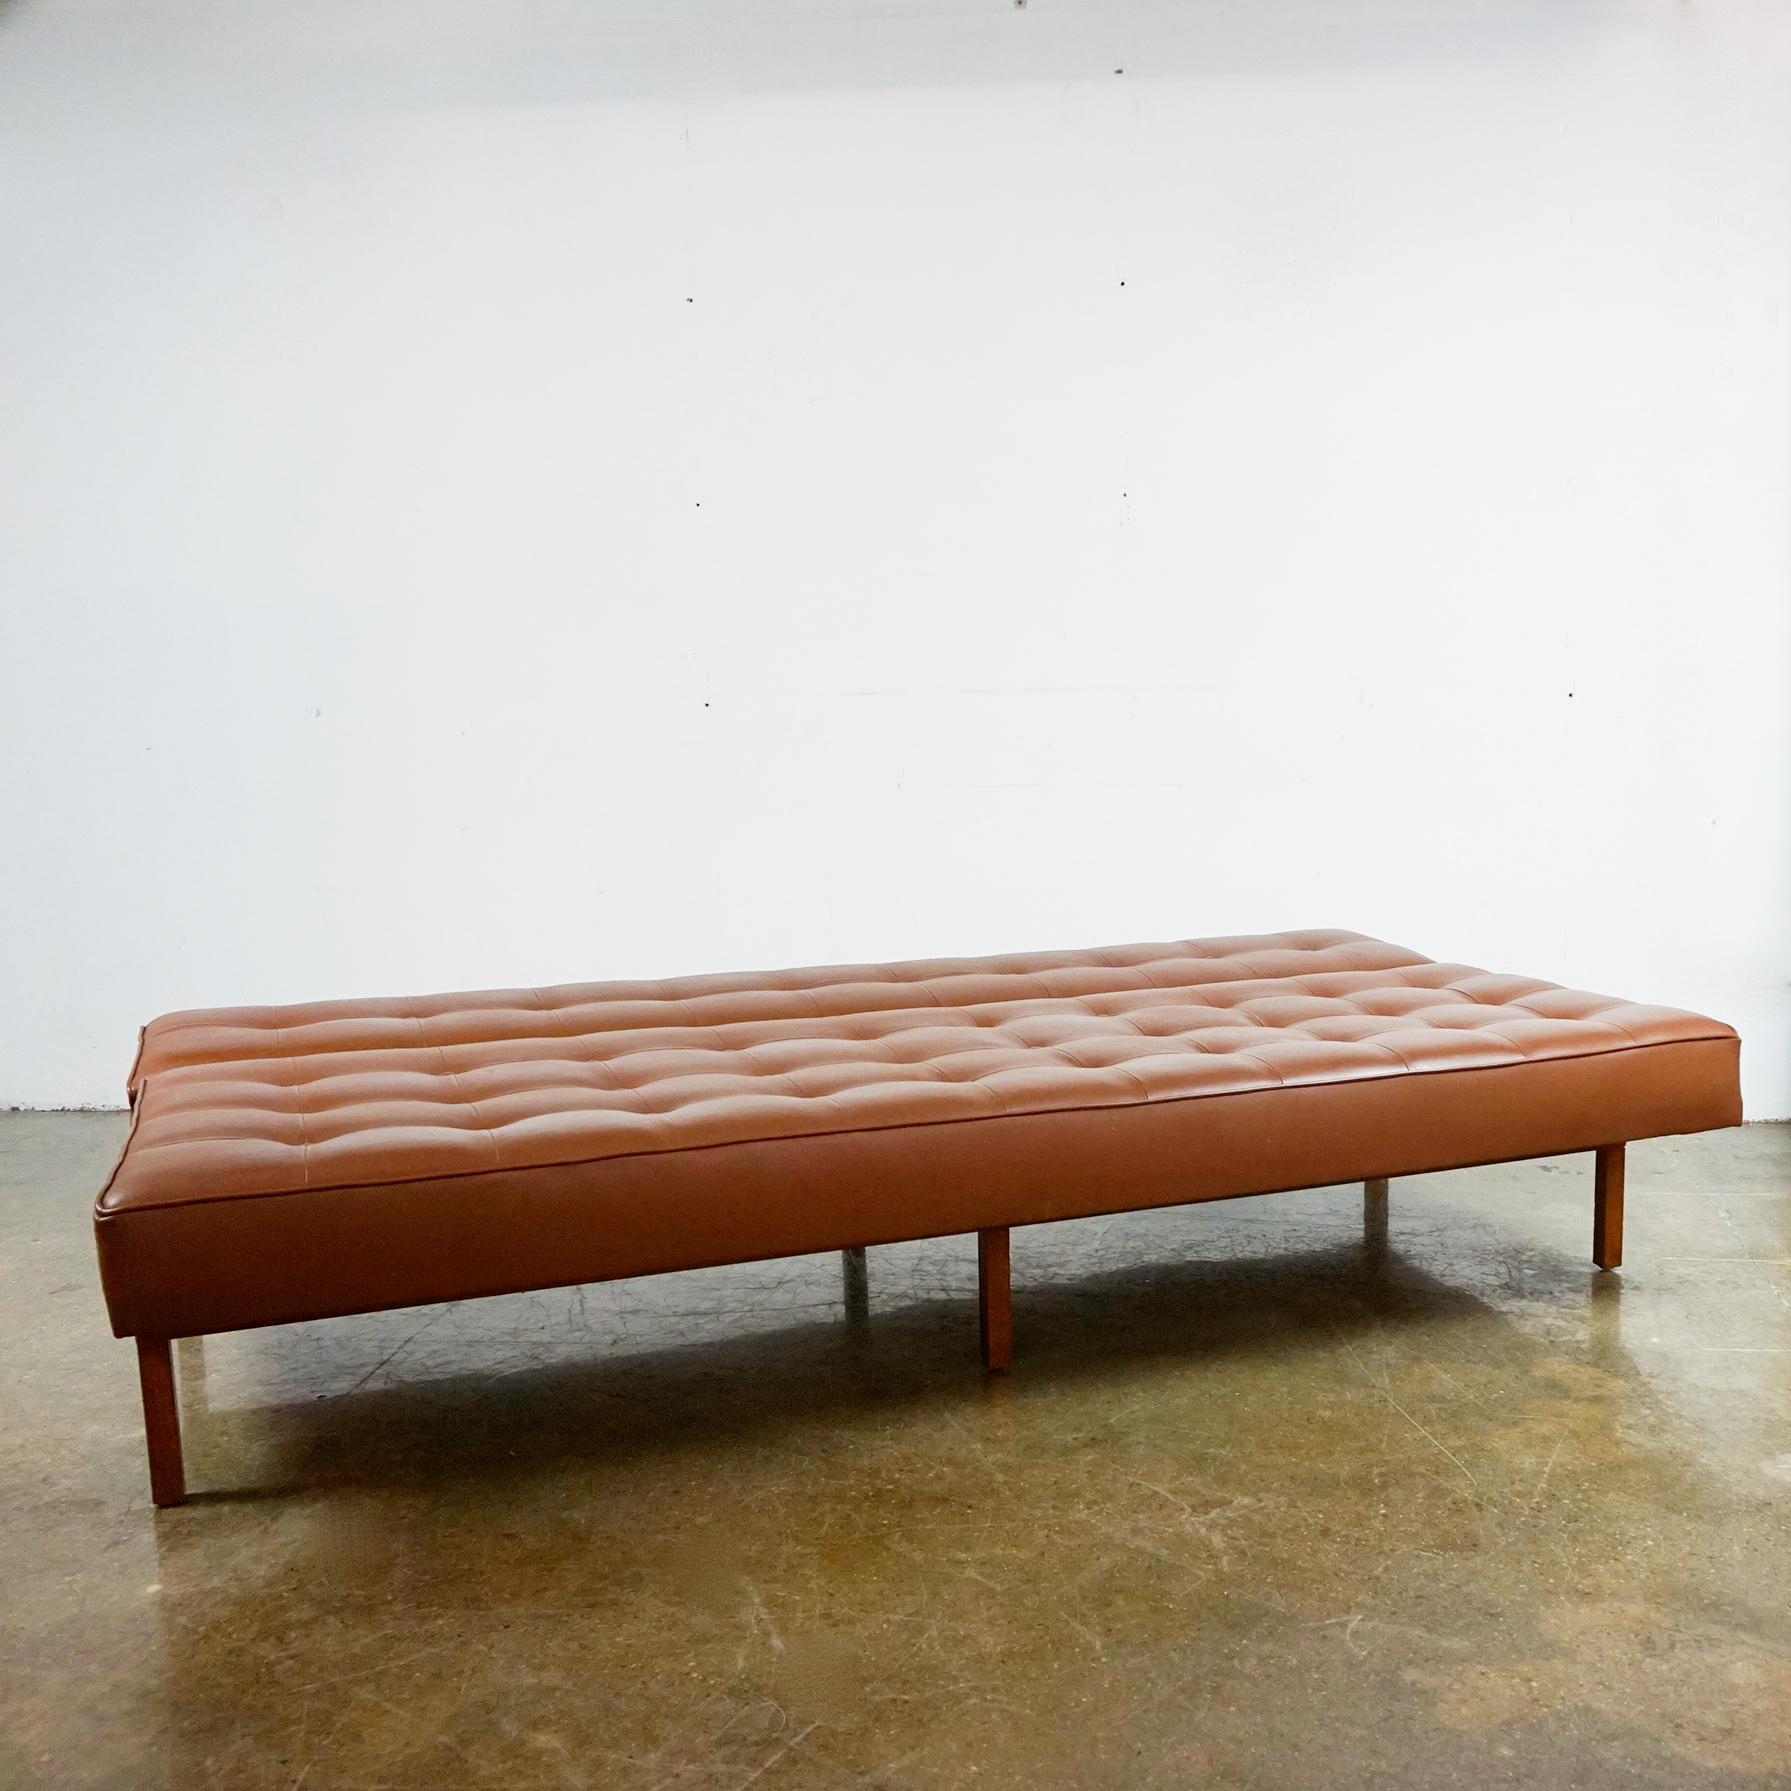 Austrian Mid-Century Modern Cognac Leather Sofa or Daybed by Johannes Spalt for Wittmann